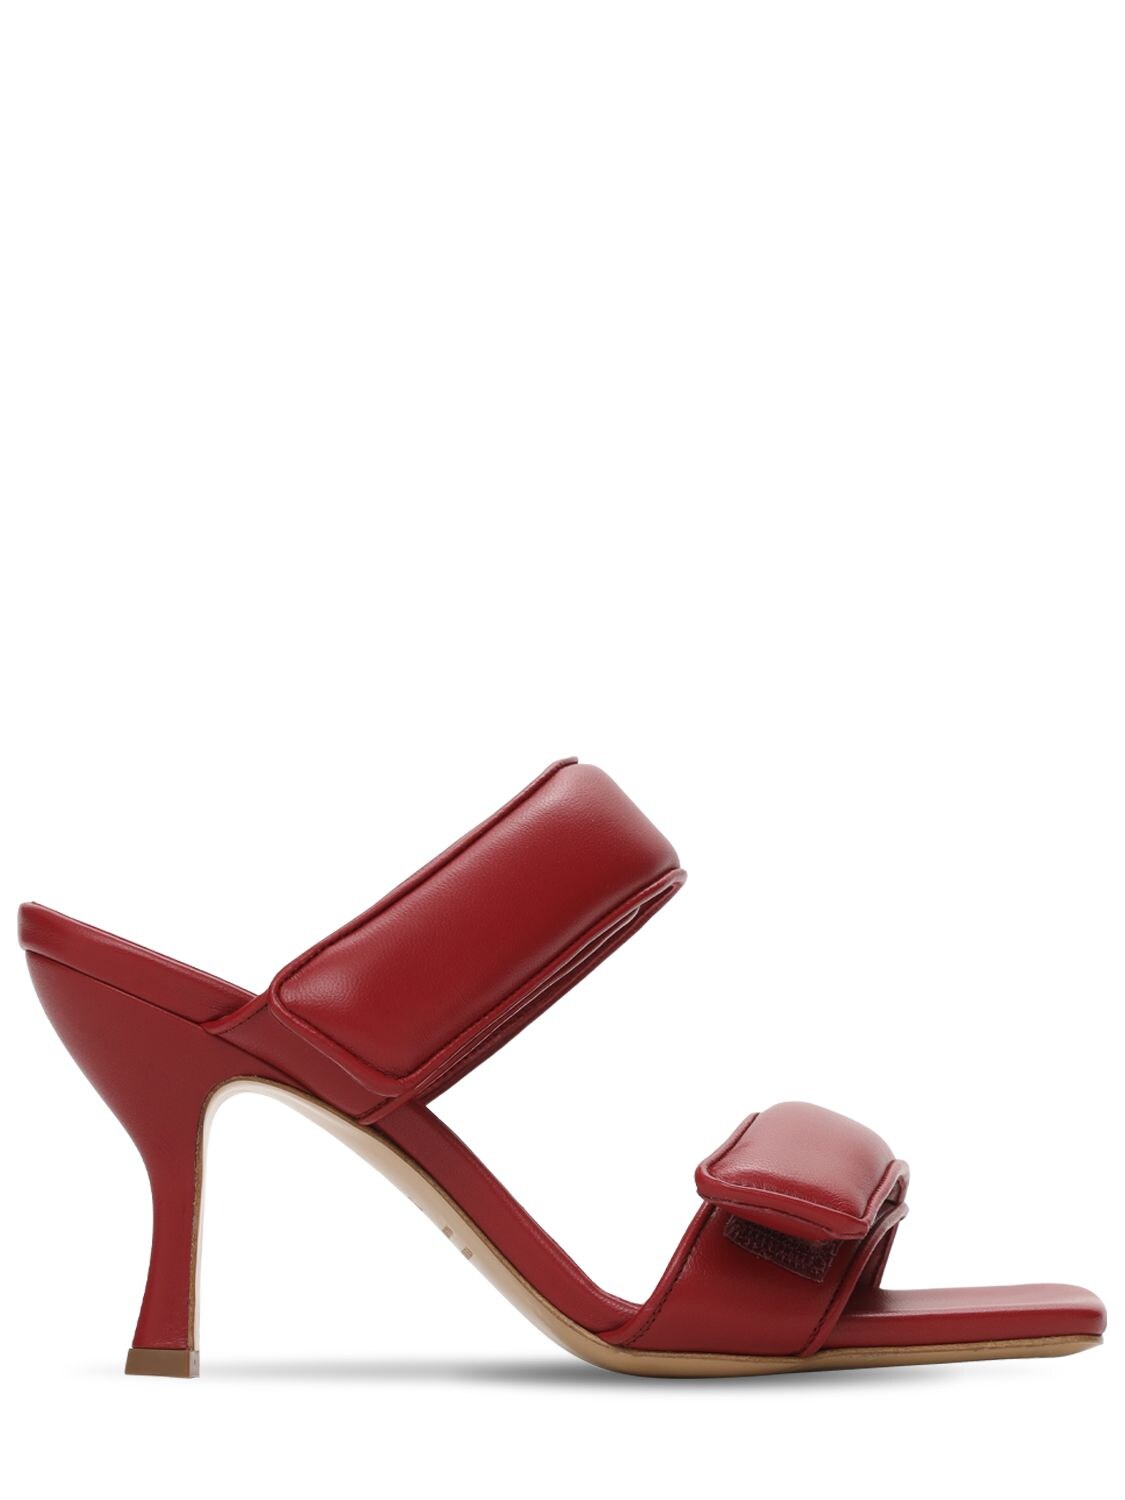 GIA X PERNILLE TEISBAEK 80mm Padded Leather Strappy Sandals